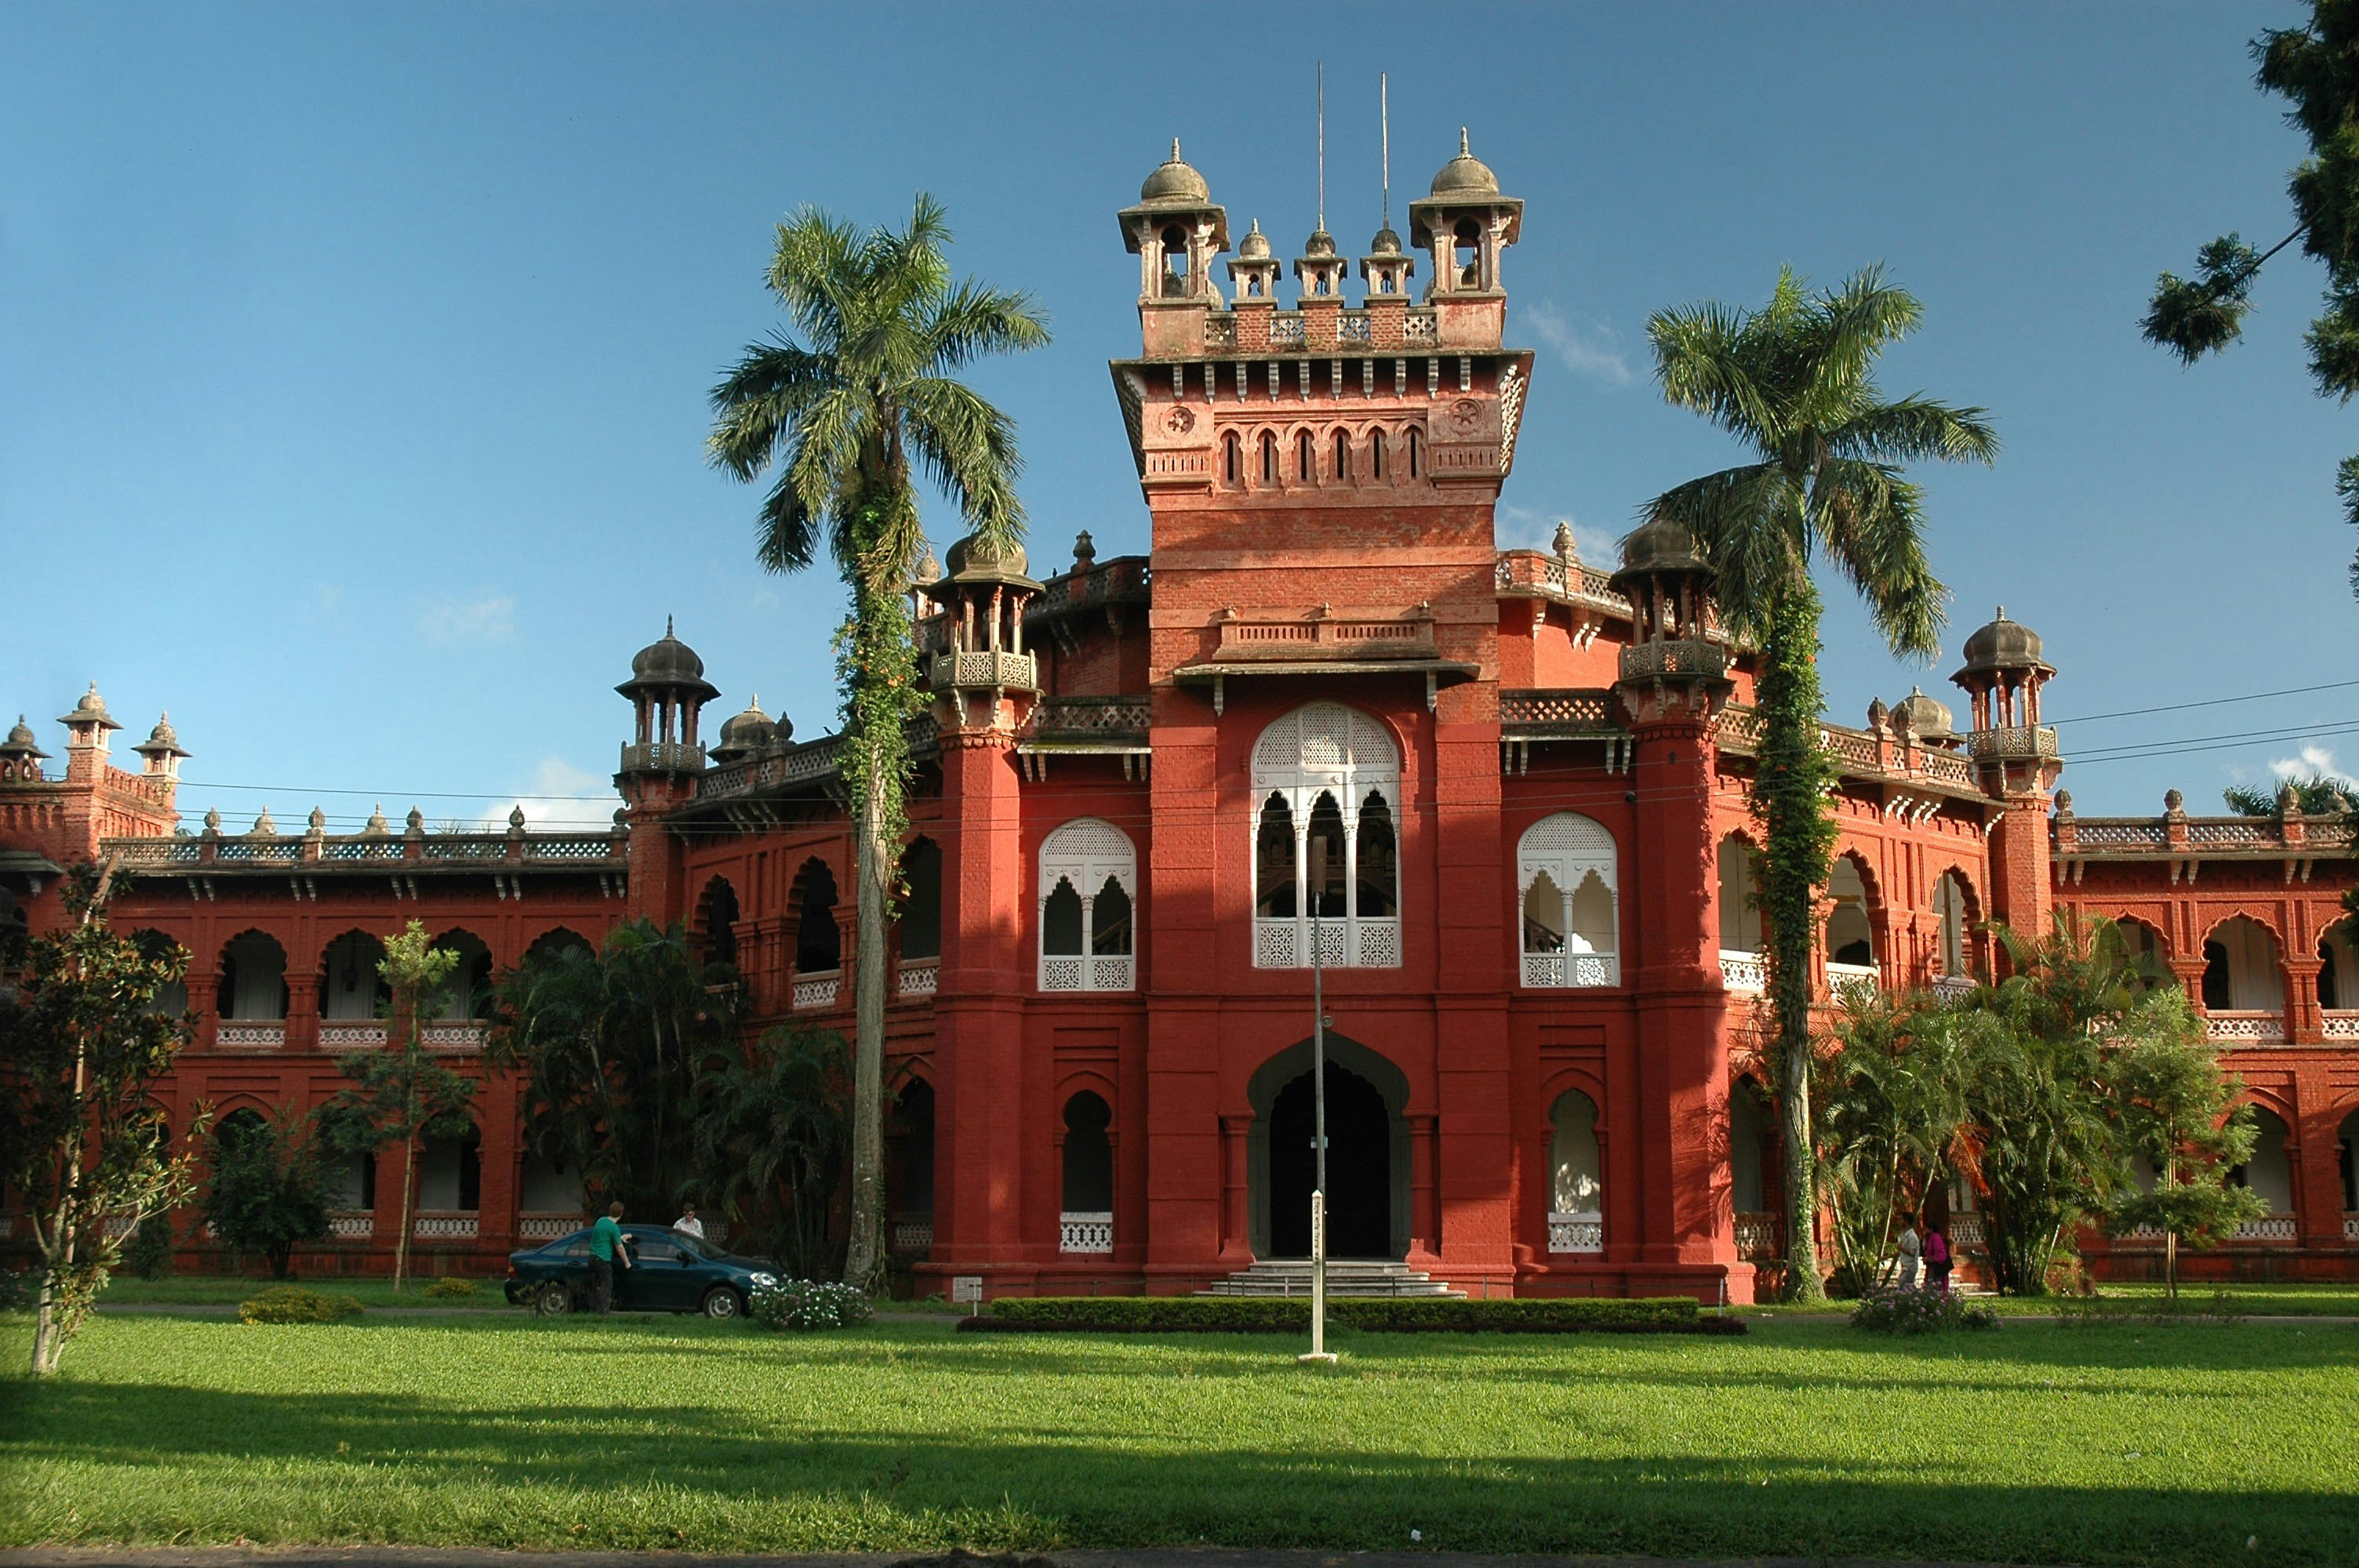 The brick-red Curzon Hall, a quasi-Gothic building built in the style of European-Mughal architecture. The large building almost resembles a castle, with turrets, arched balconies and minarets. In front of the grand building is a manicured green lawn and some trees.